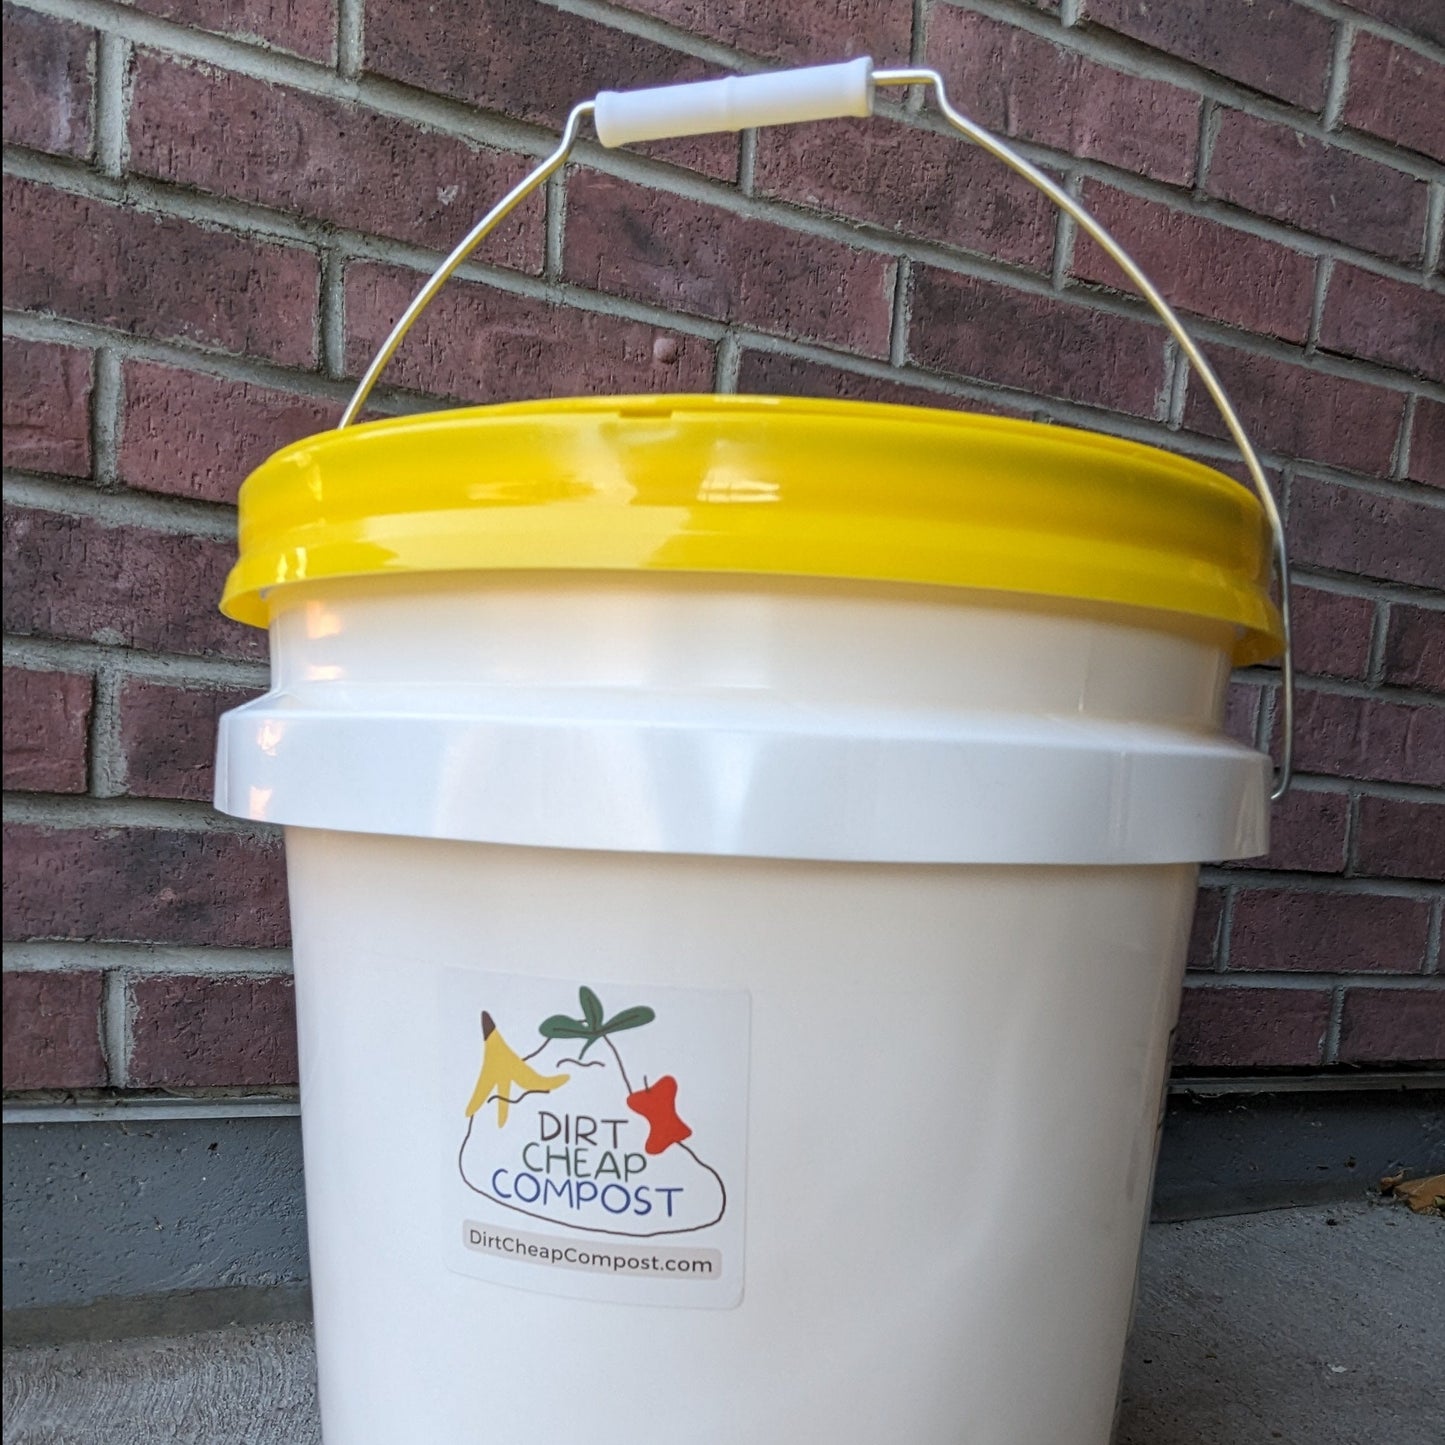 Included in every membership is a 5-gallon metal bin with a sealed lid and handle, along with your first 25 kitchen scrap compostable bags (you'll use 1 bag ever 2-3 days usually). Simply tie your bags when they're full and drop them in the bin at the front door, and we'll swing by once a week and pick them up, just like your trash and recycling service.